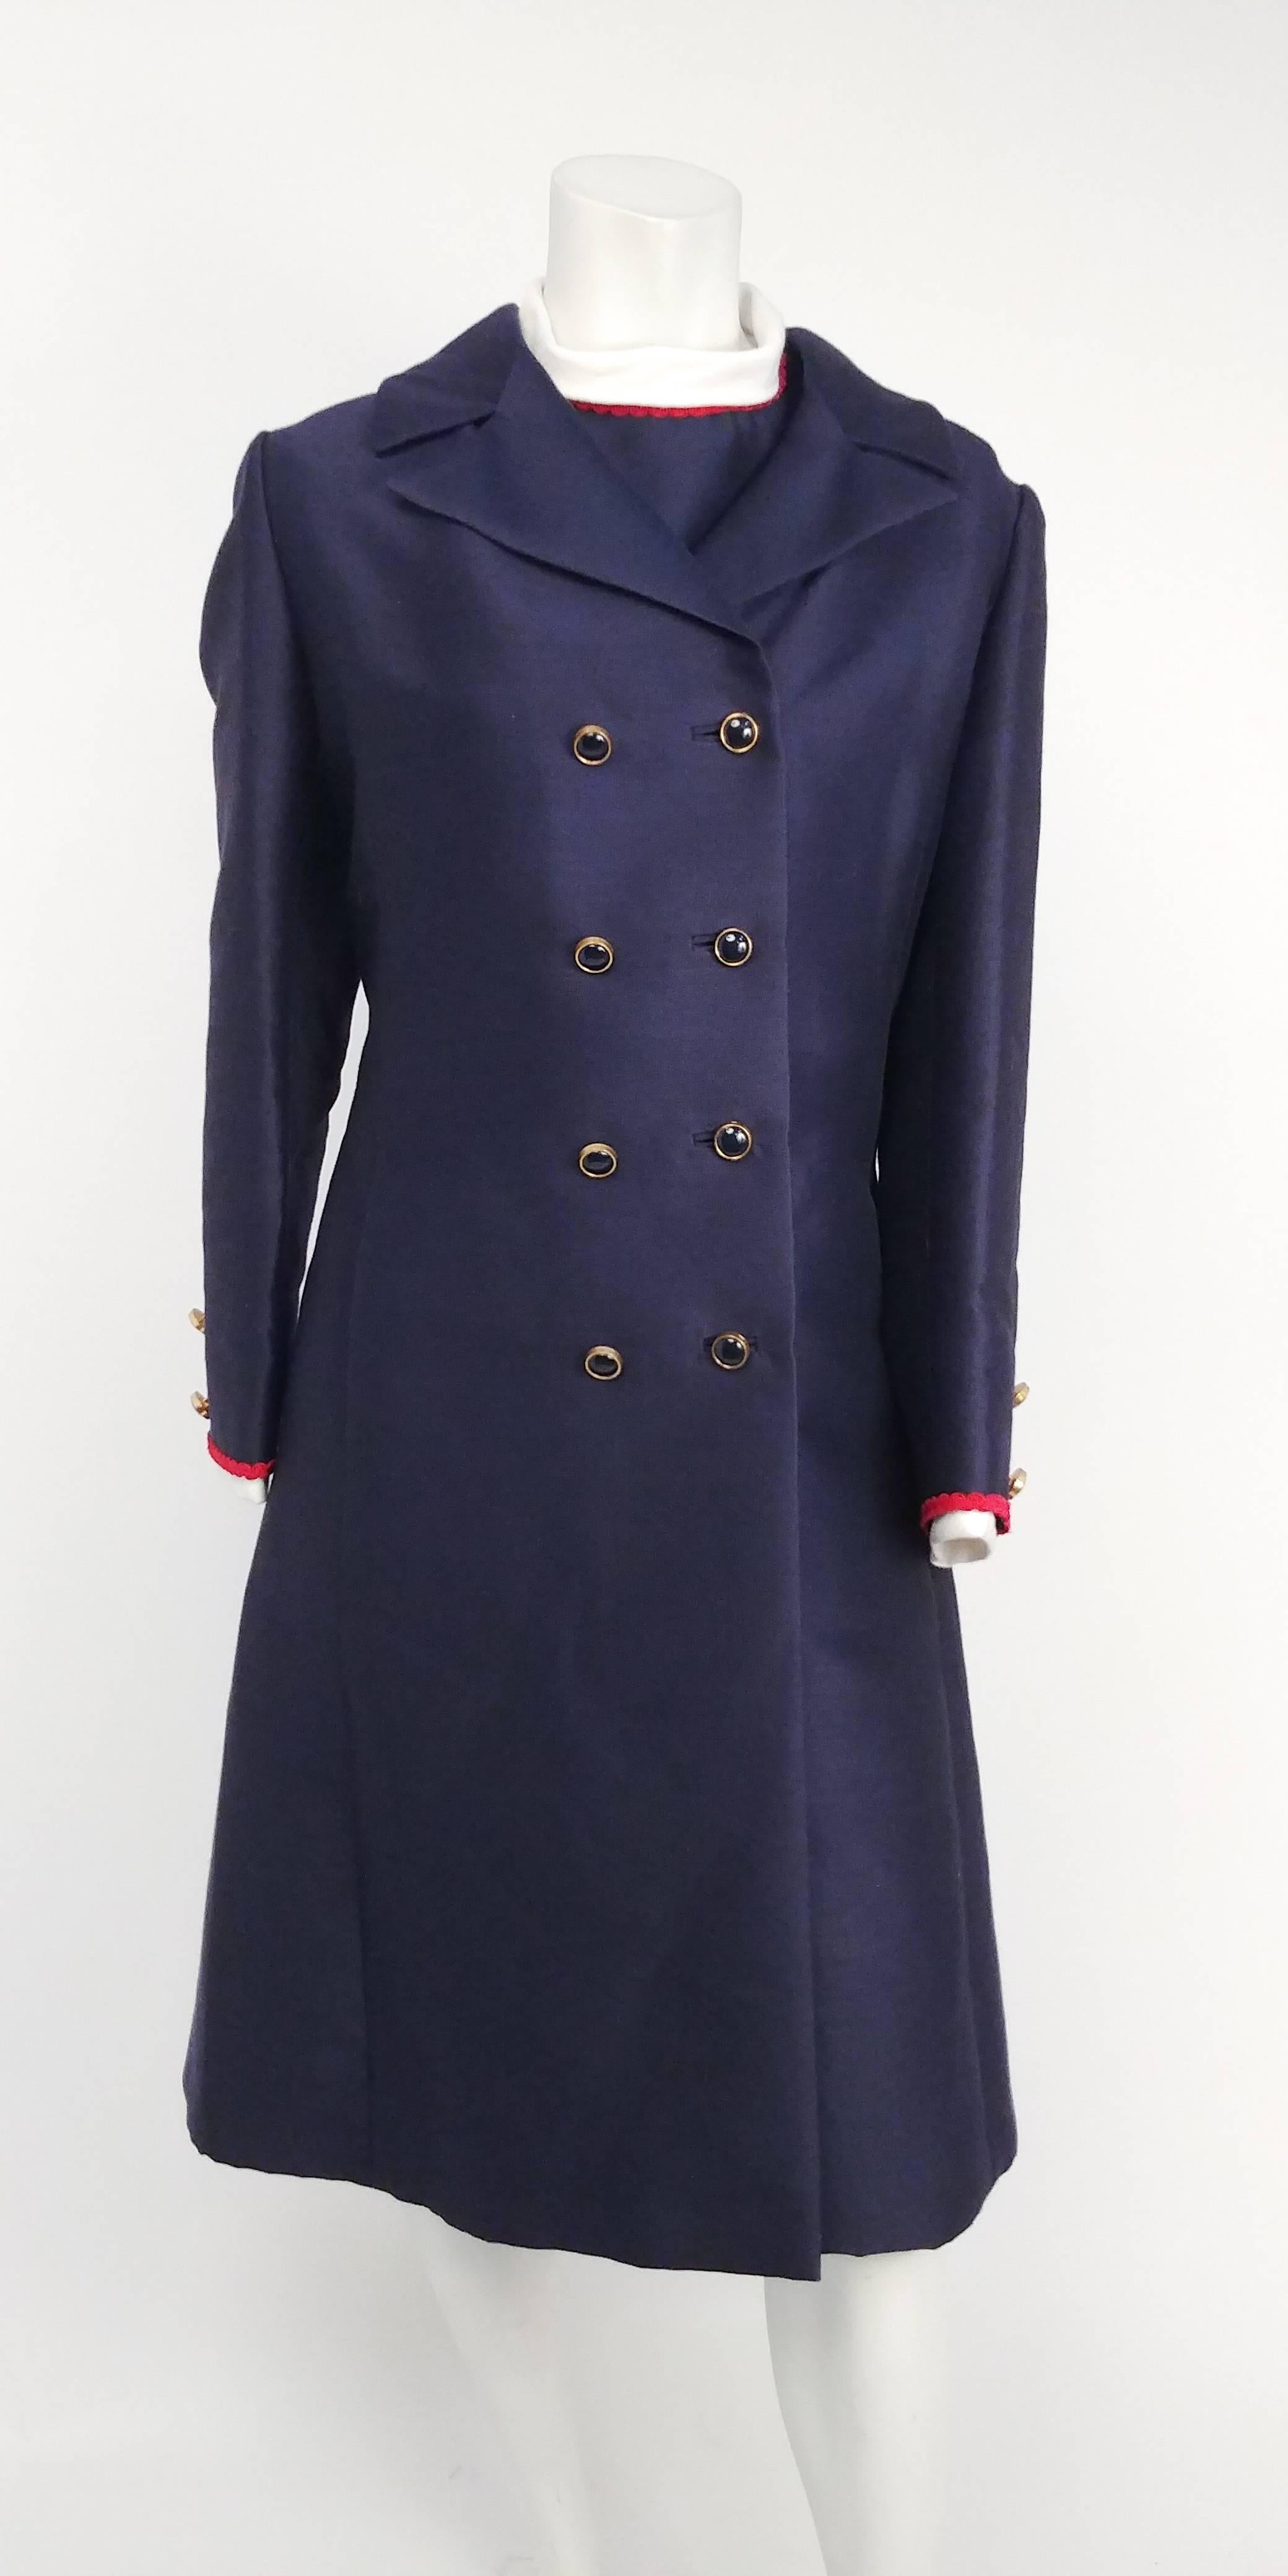 1960s I. Magnin Navy Blue & Red Dress & Coat Set. Navy blue faille dress (with invisible pockets), white cotton fold-down collar and red rickrack trim comes with matching belt. Double breasted coat in same fabric, matching trim, and fabulous